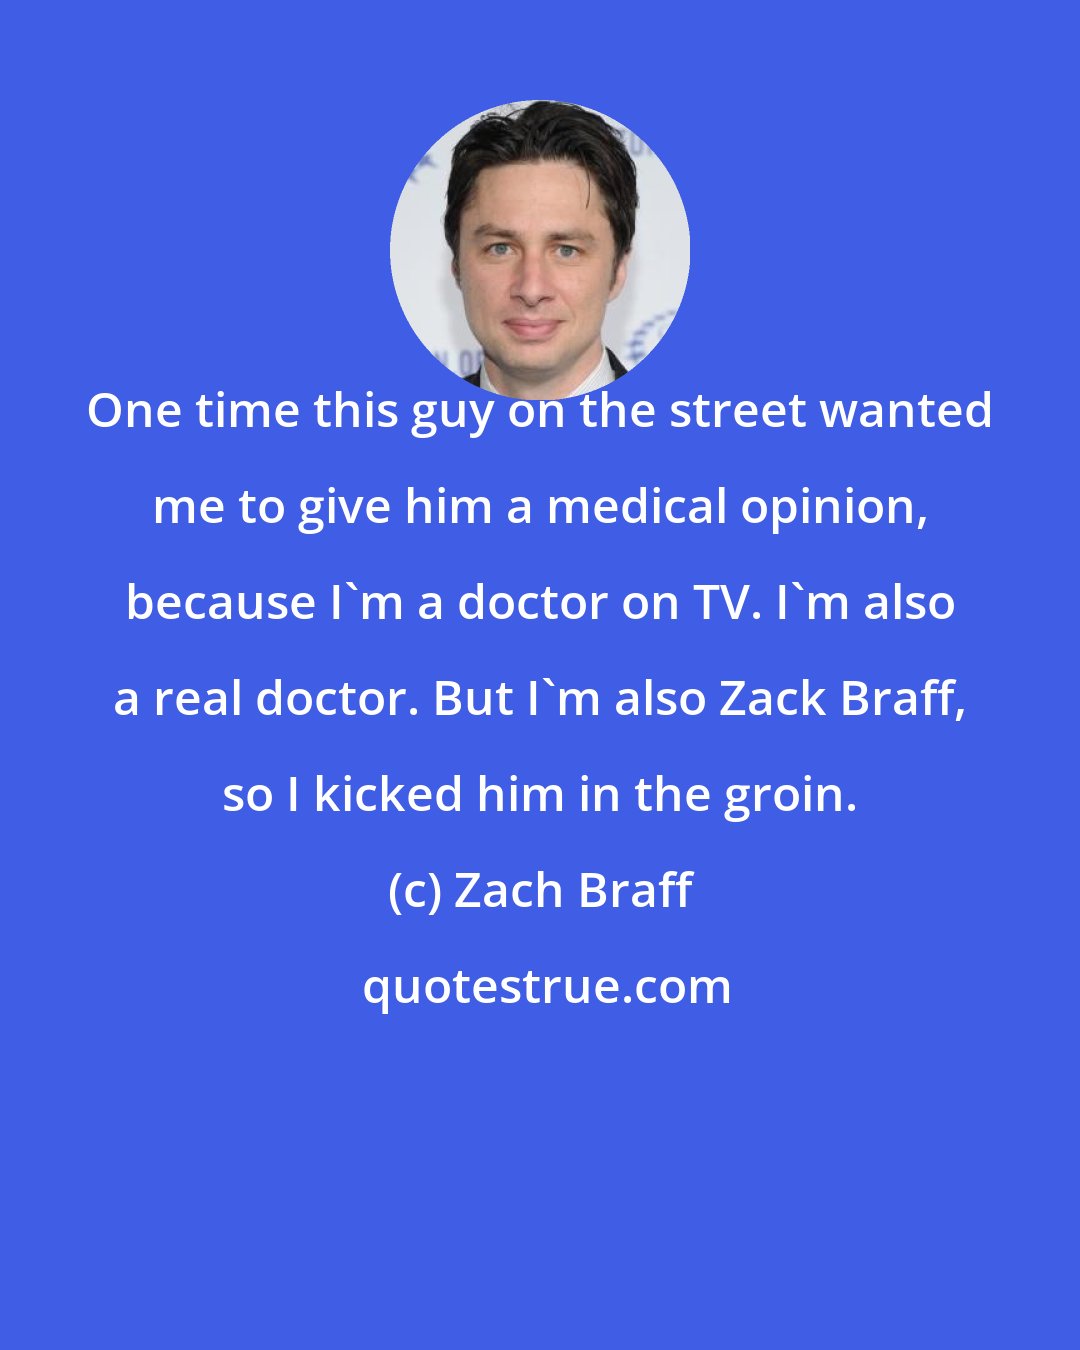 Zach Braff: One time this guy on the street wanted me to give him a medical opinion, because I'm a doctor on TV. I'm also a real doctor. But I'm also Zack Braff, so I kicked him in the groin.